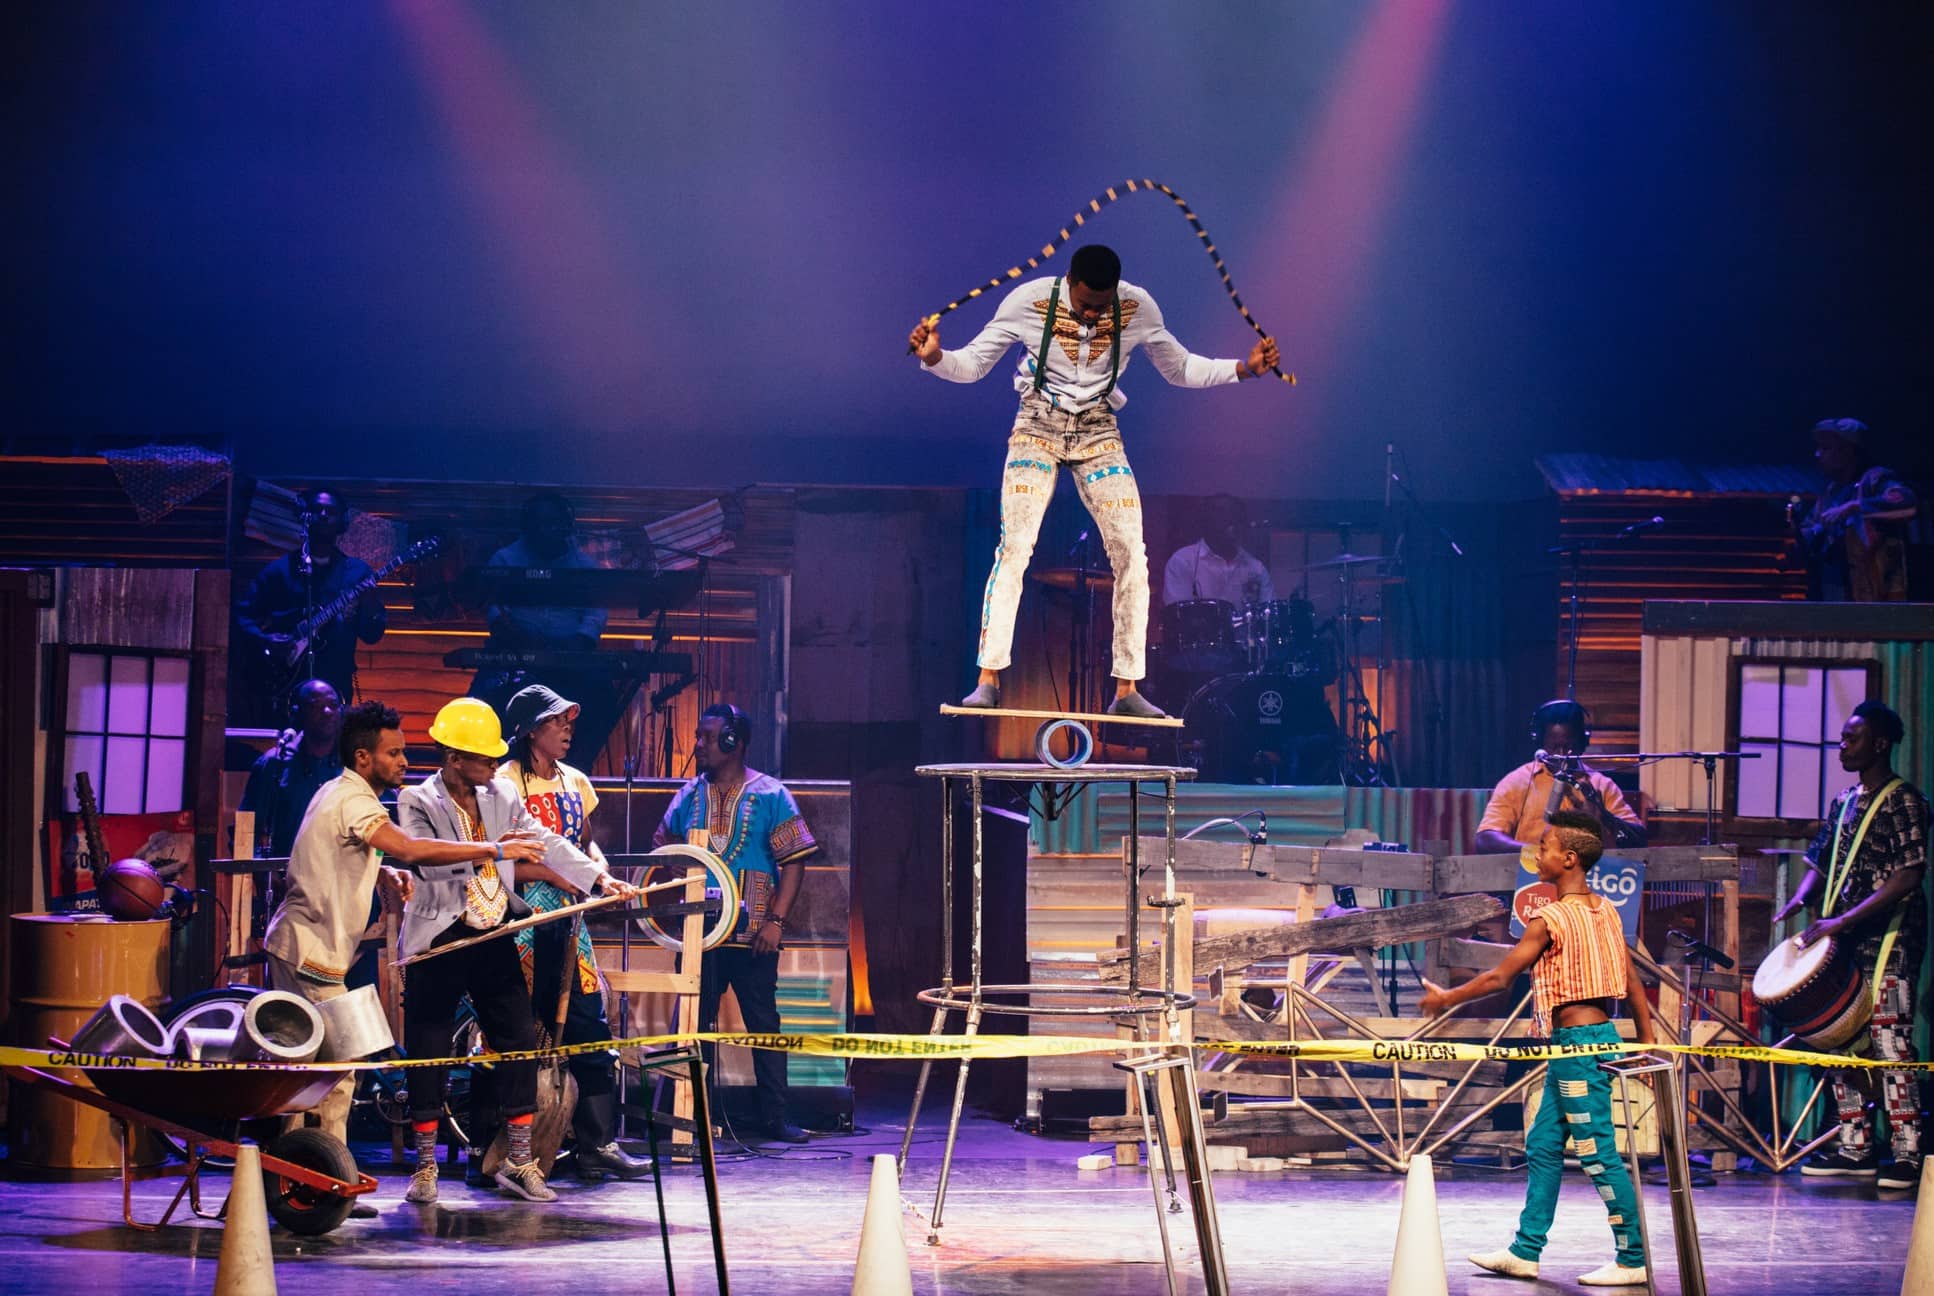 6-facts-you-must-know-about-circus-der-sinne